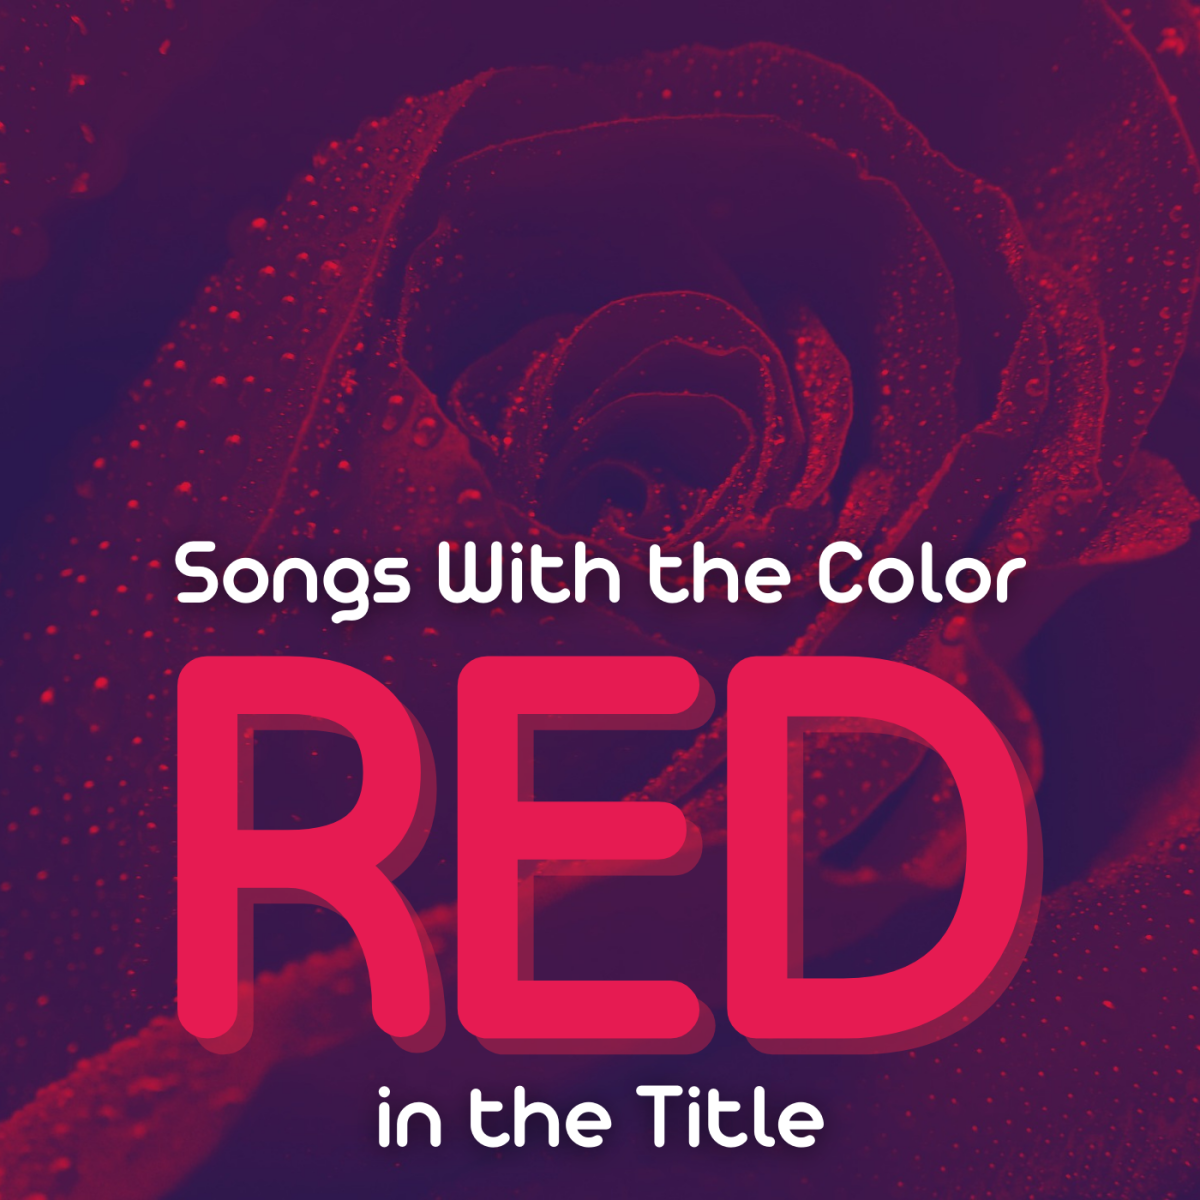 Red is an attention-grabbing color that symbolizes passion, danger, and strength.  Celebrate the intensity and beauty of the color red with a playlist of pop, rock, country, and R&B songs.